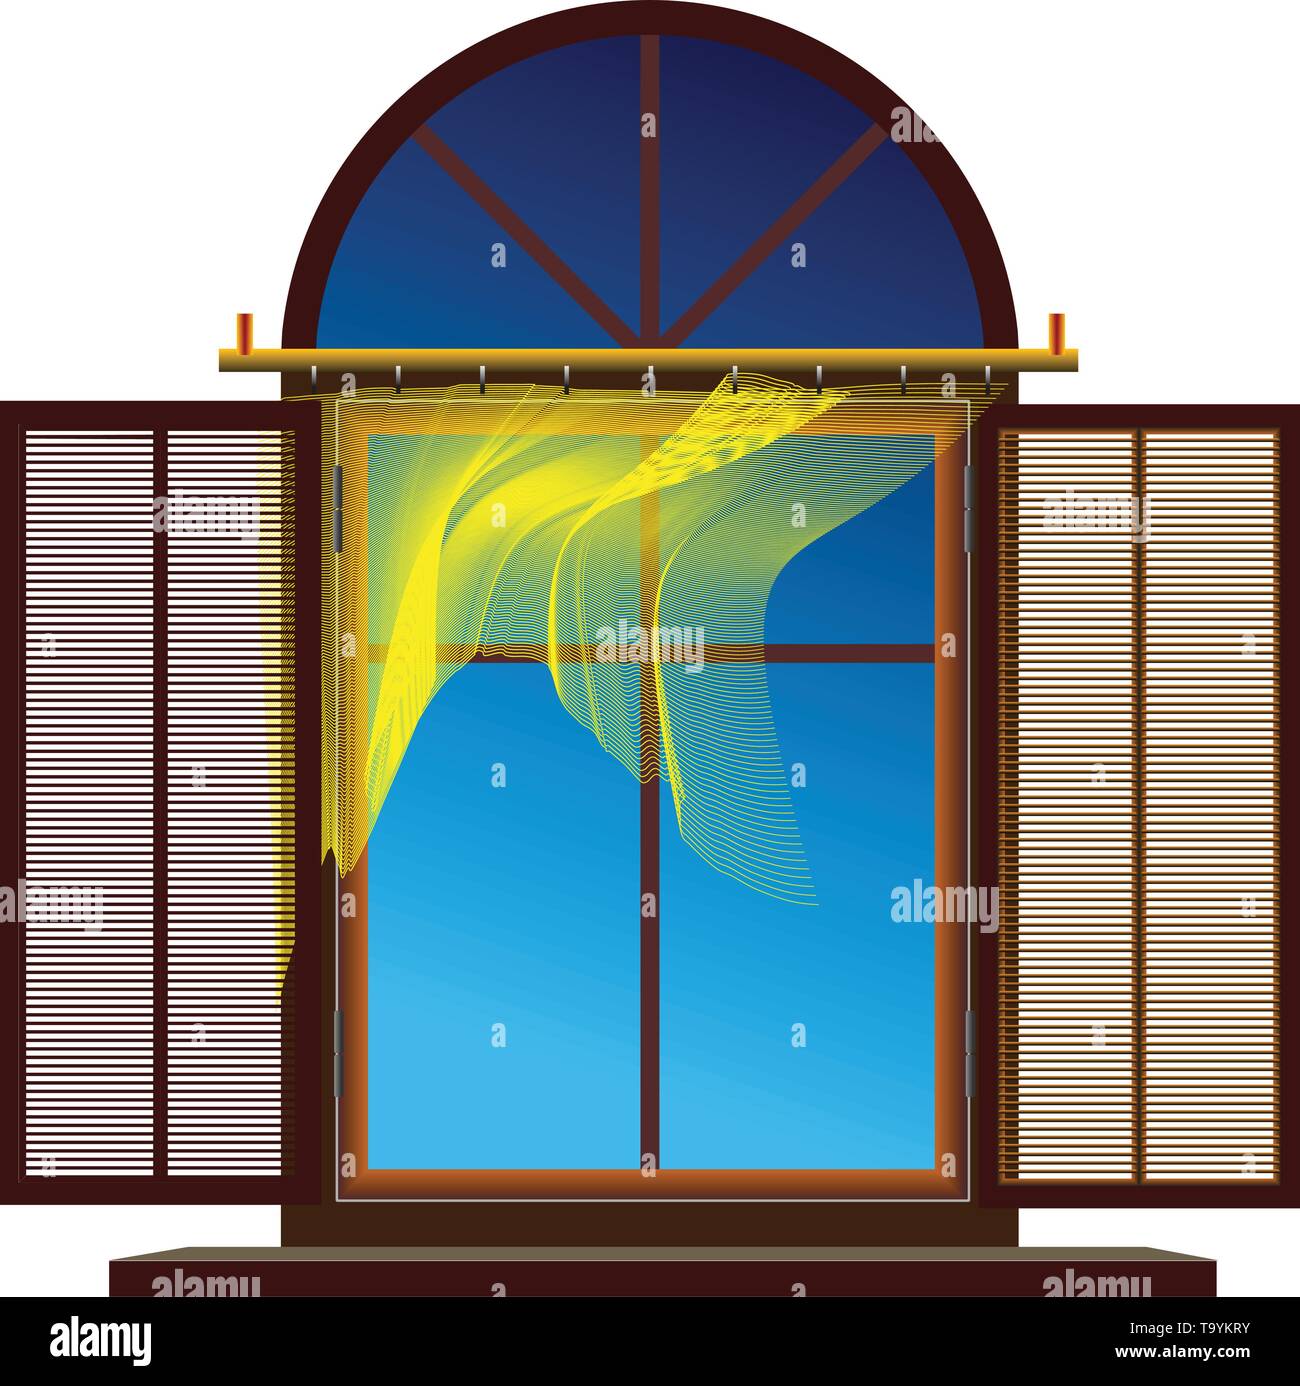 Exposed window with flutter brise-bises. Vector illustration Stock Vector